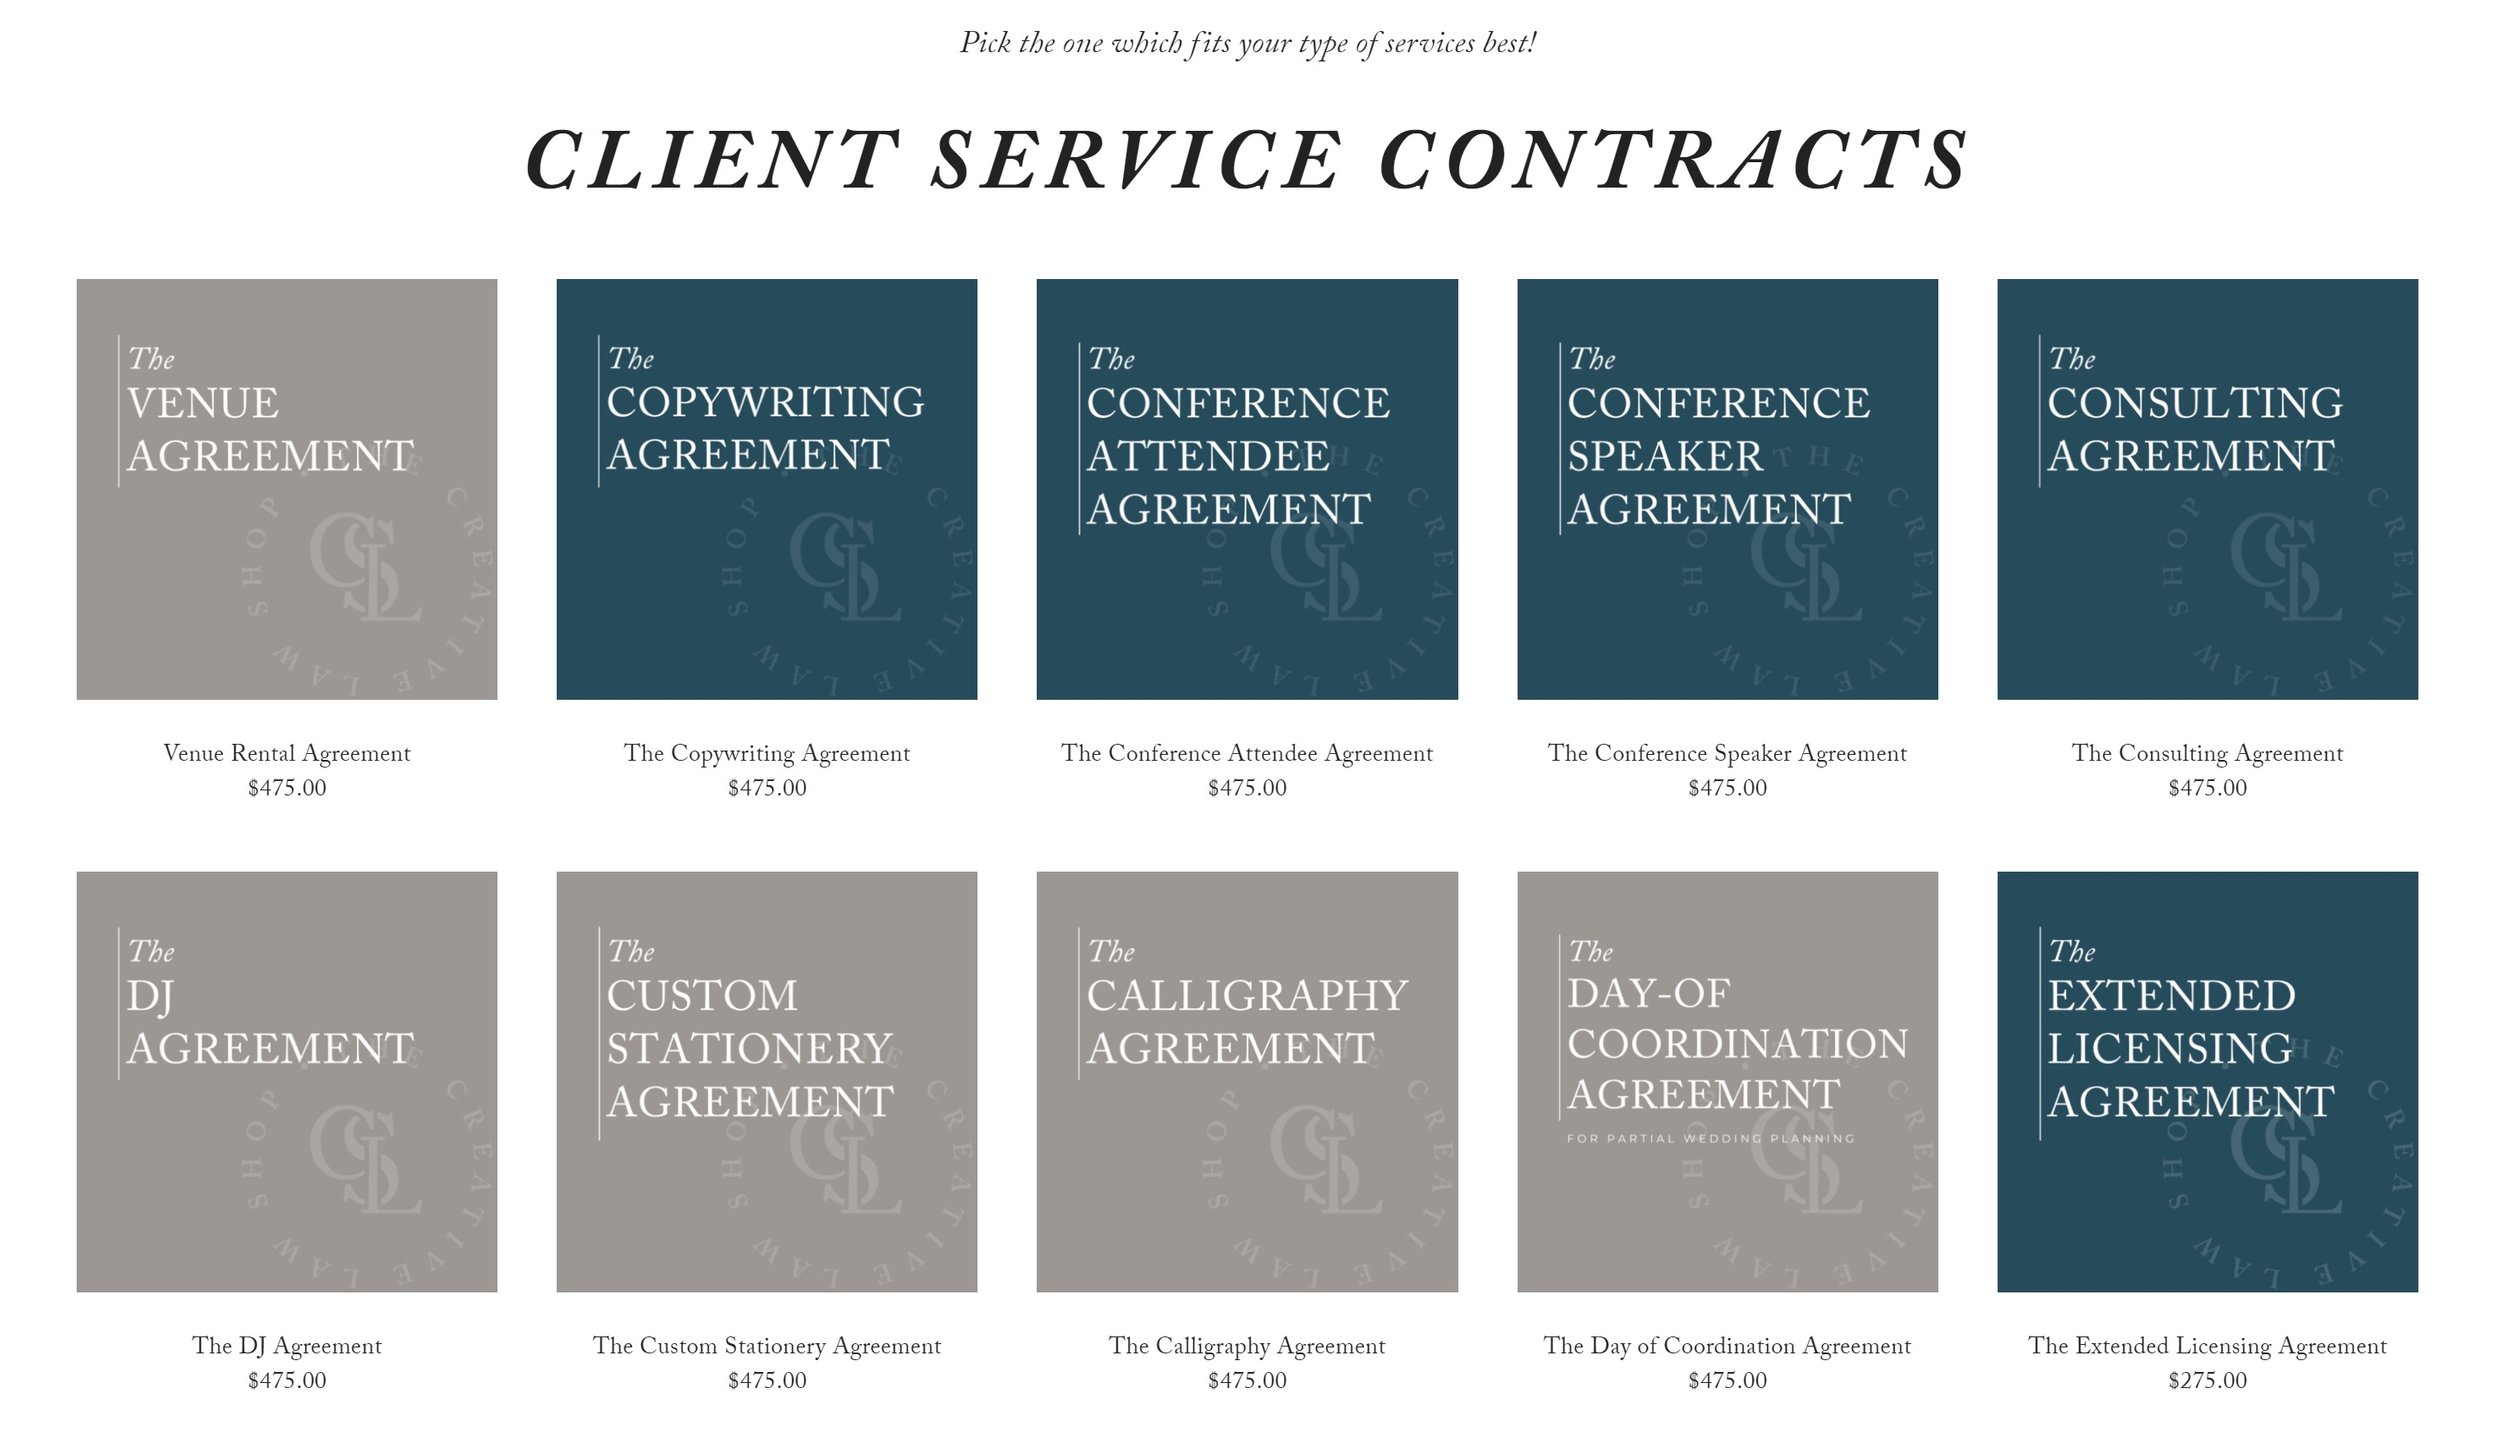 CLS service contracts.jpg